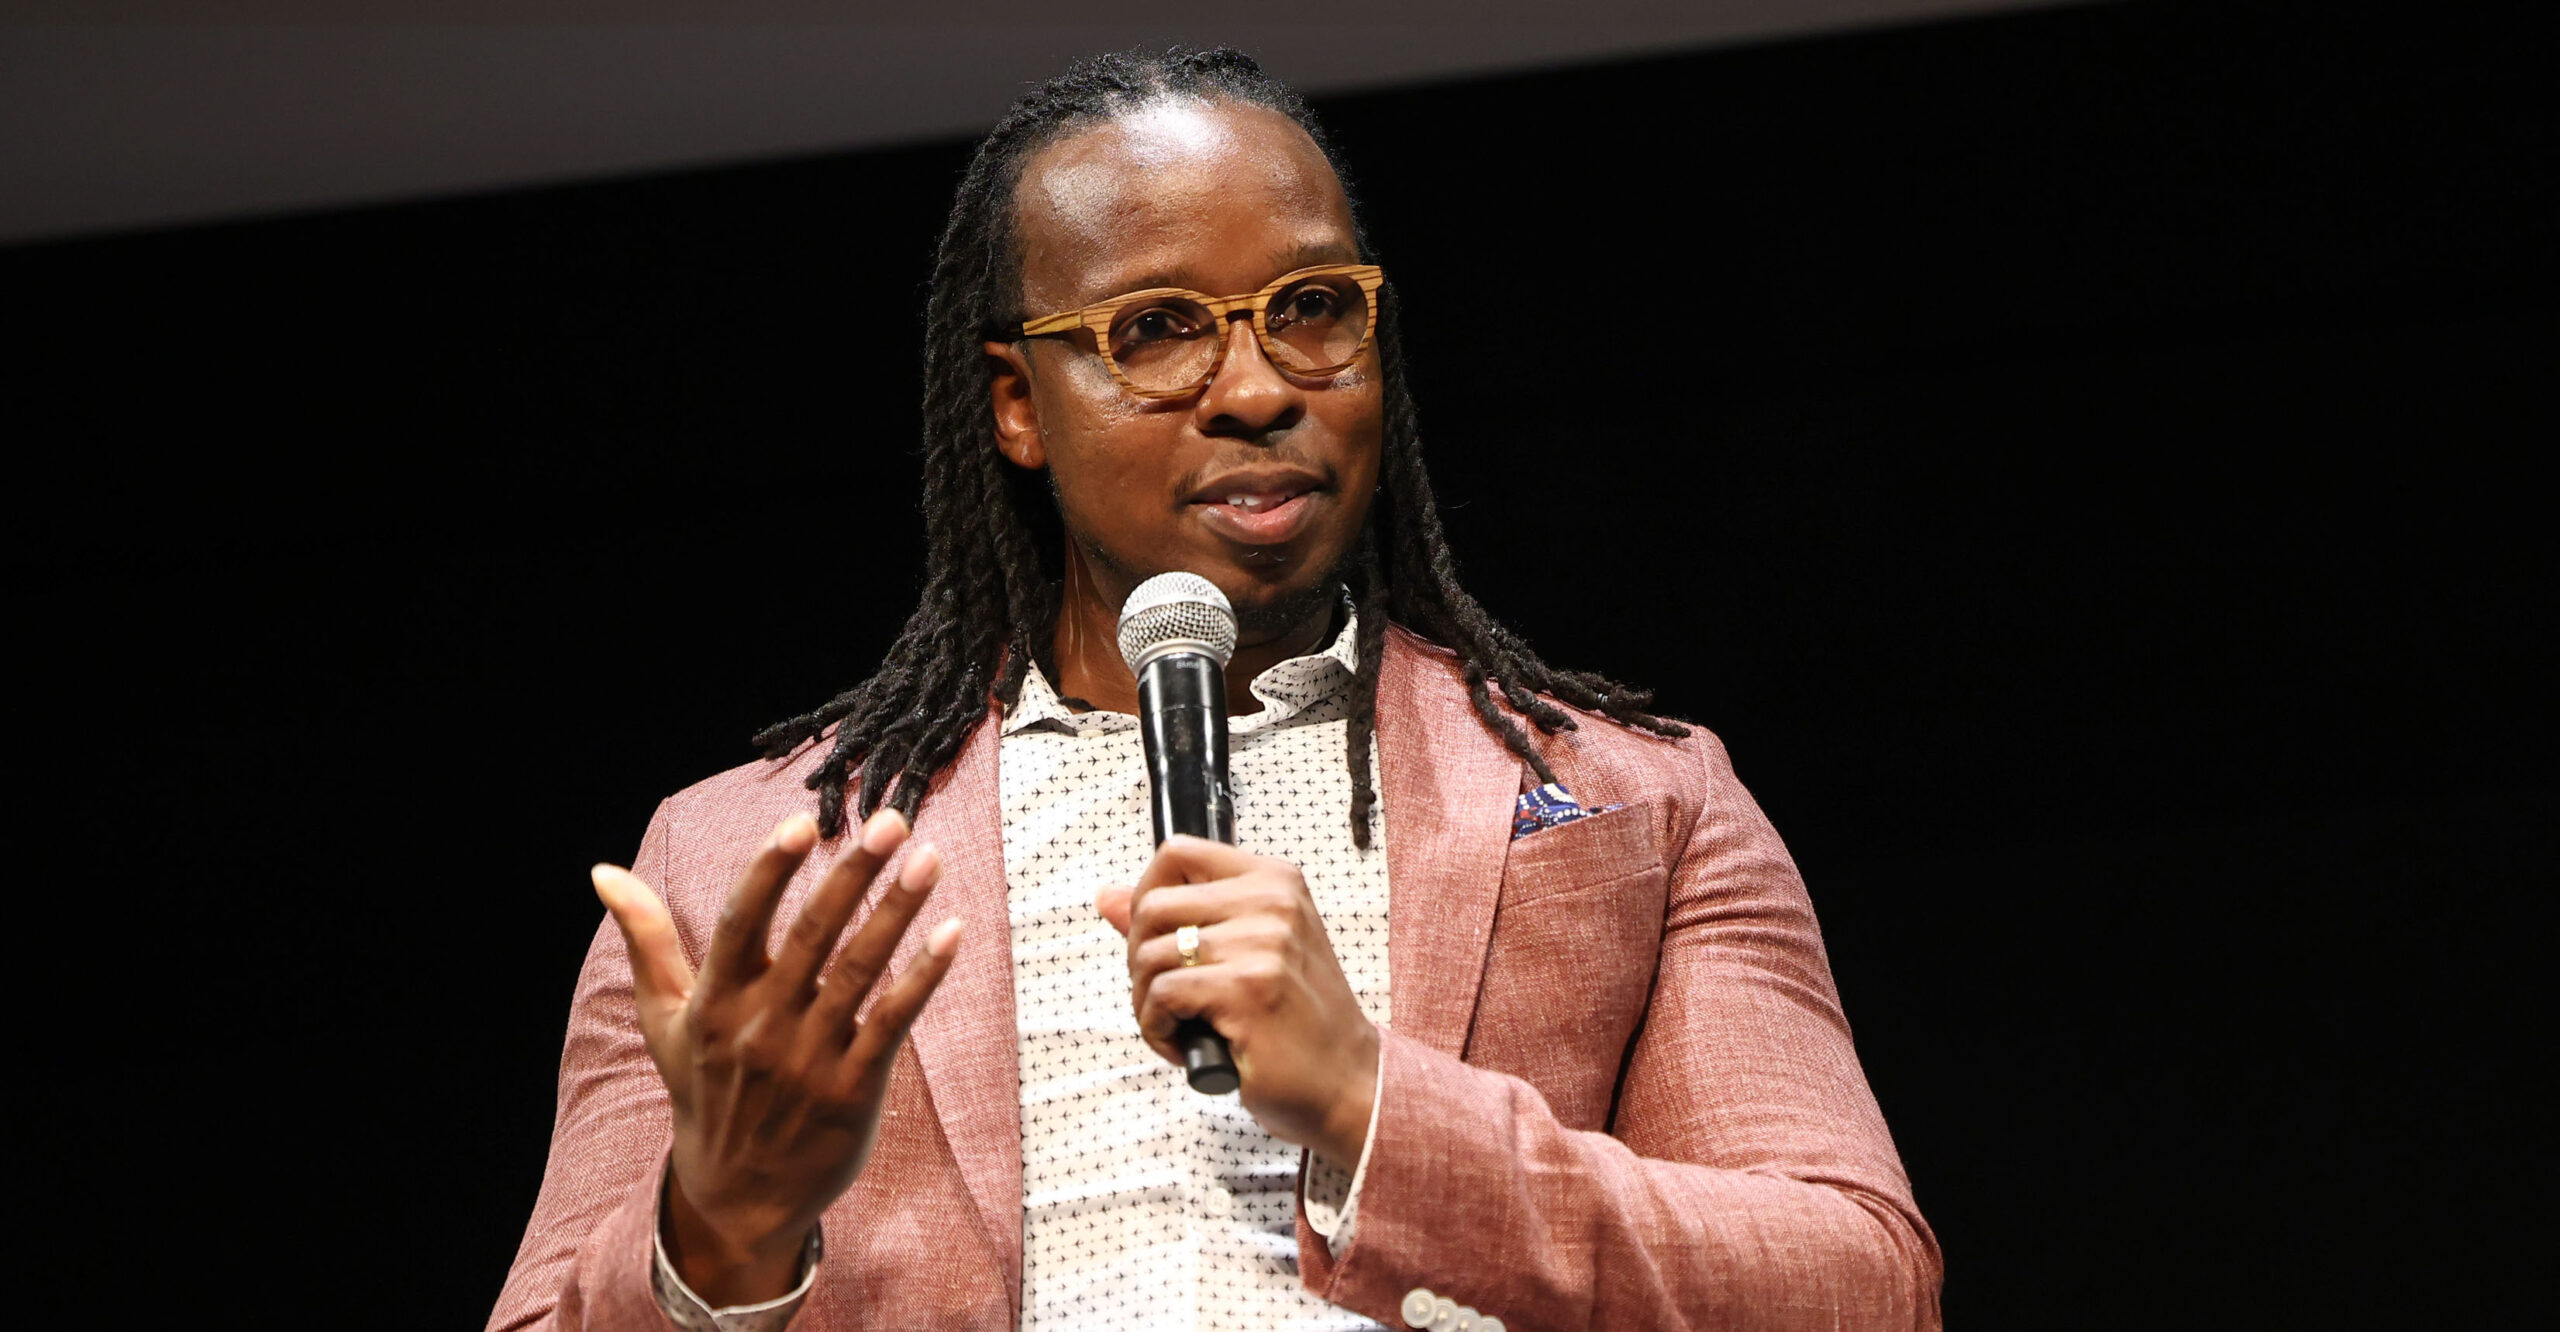 ICYMI: As Ibram X. Kendi's 'Anti-Racism' Center Implodes, Let's Make Sure to Stop His Noxious Ideology